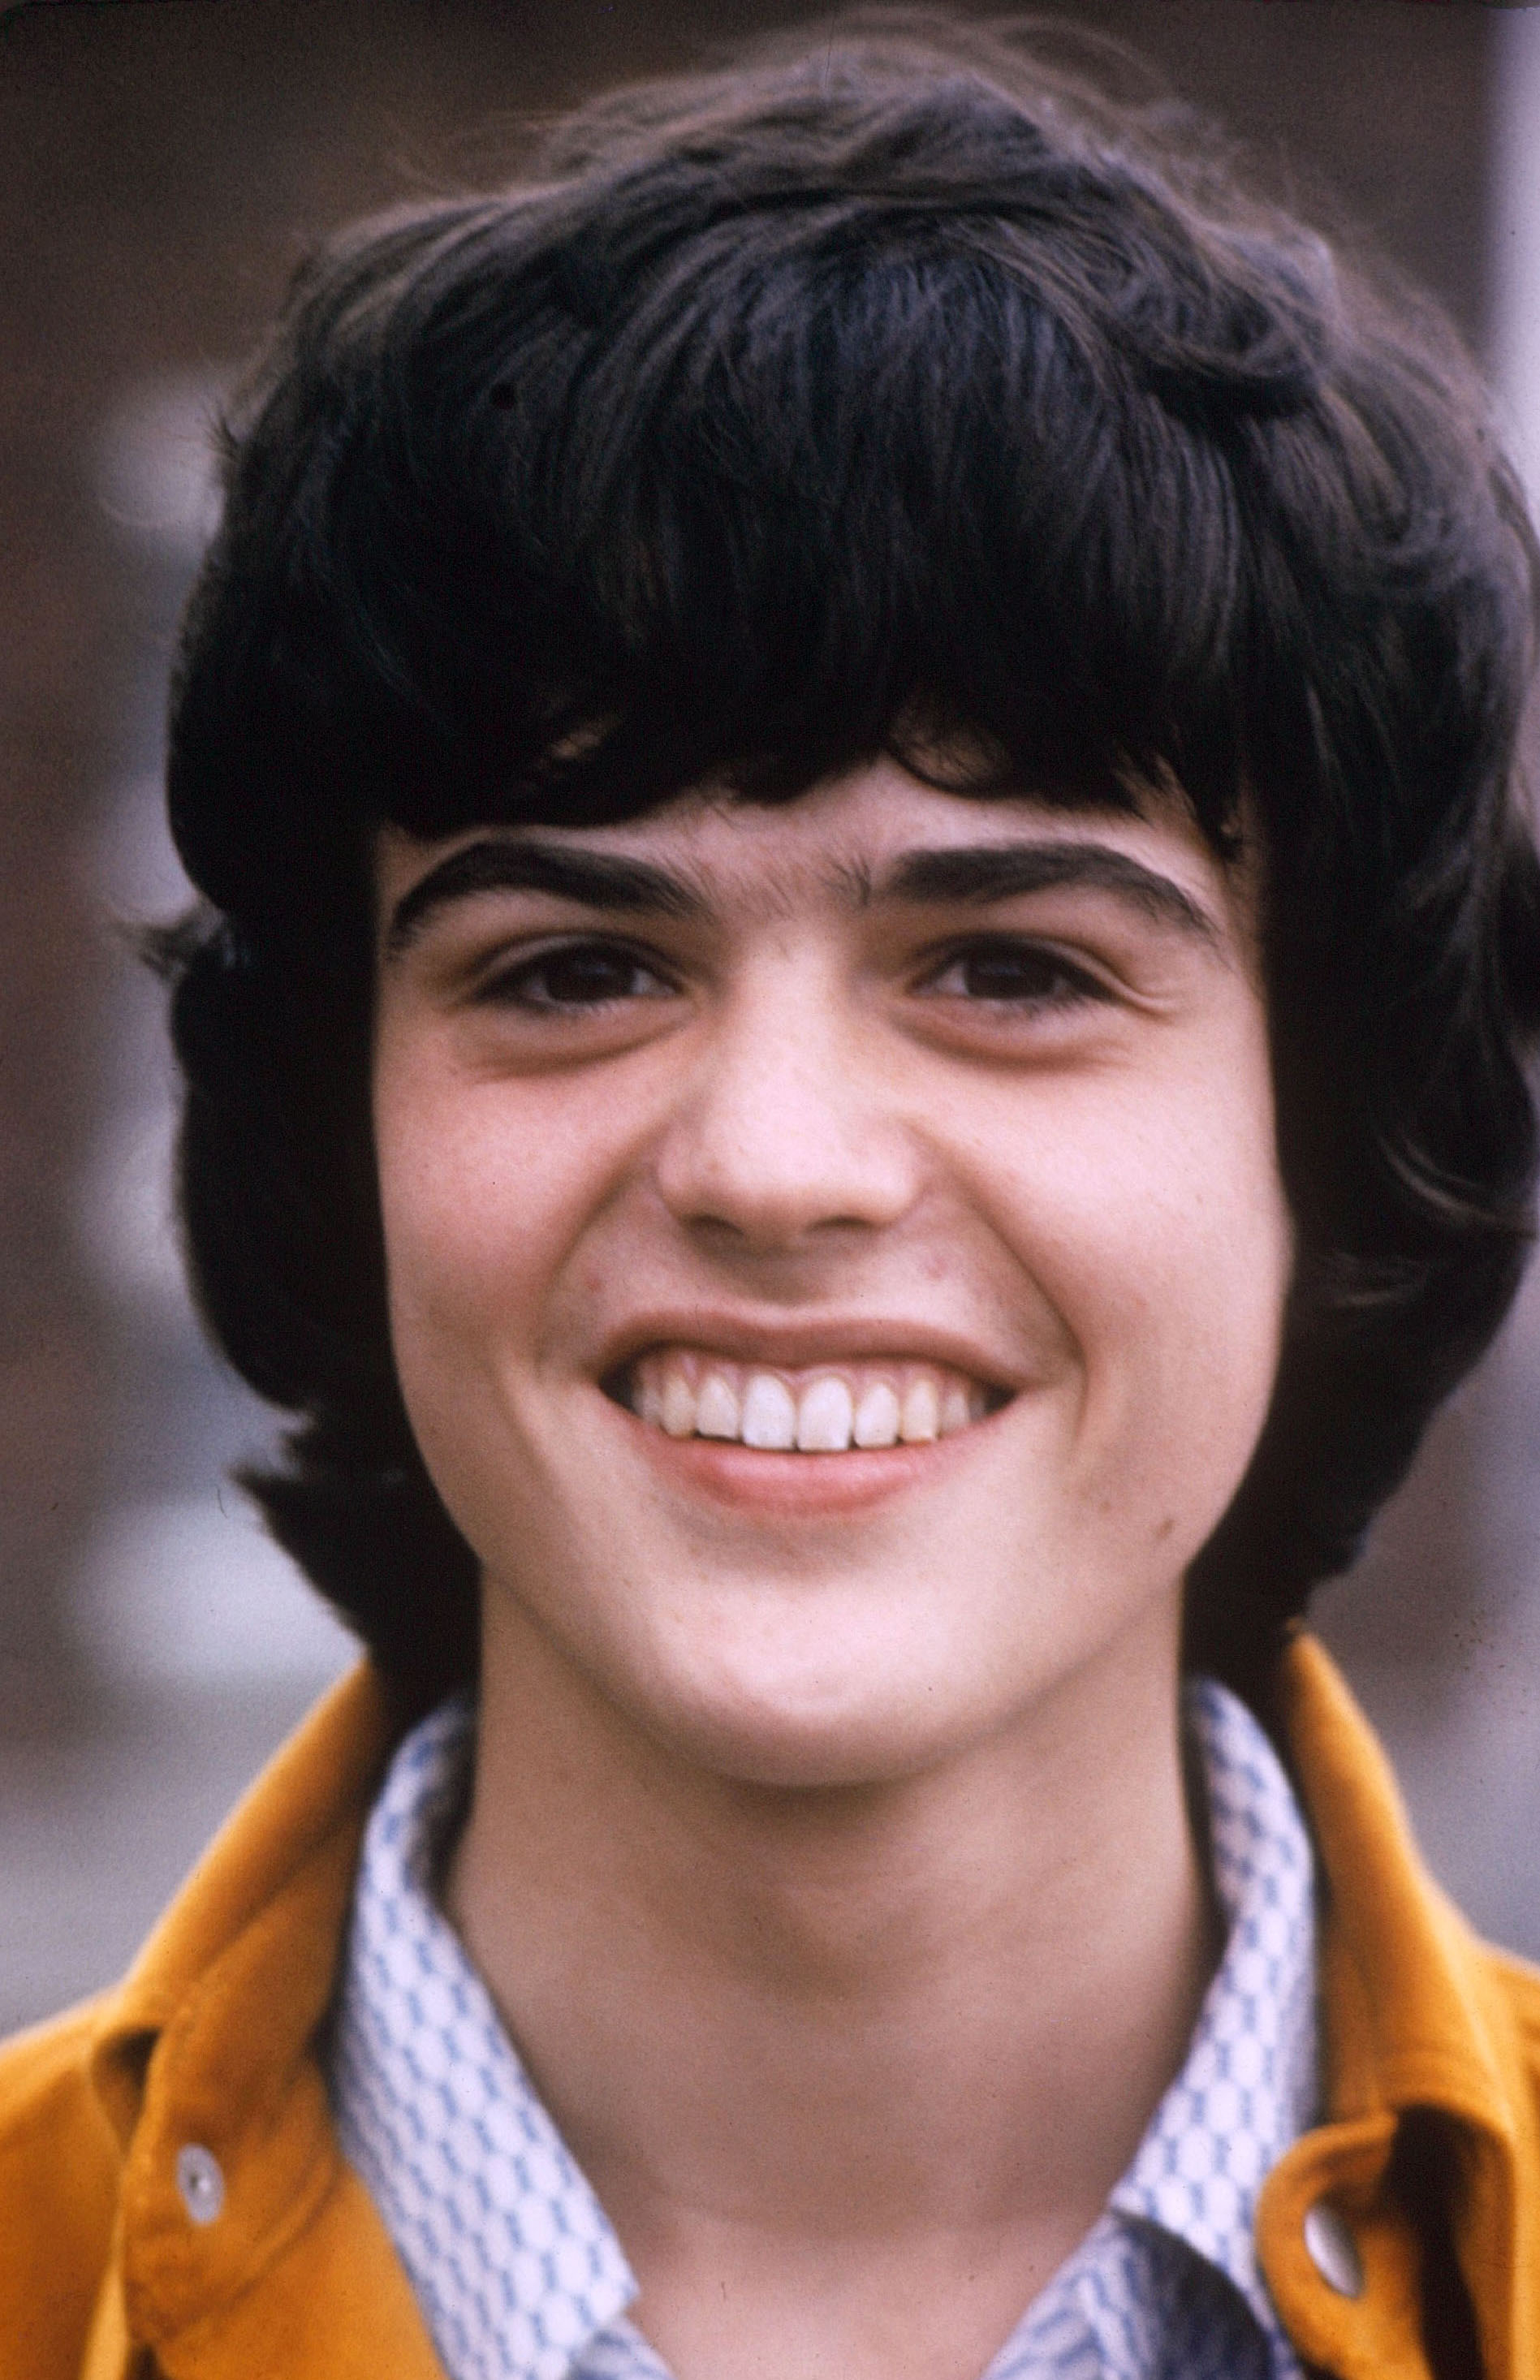 <p>Donny Osmond became the breakout star of the Osmond family after rising to fame alongside his siblings in the Osmond Brothers. He kicked off the '70s as a teen heartthrob, putting out hit singles like "Go Away Little Girl" and "Puppy Love" early that decade. Donny later found even more success after teaming up with little sister Marie Osmond for the "Donny & Marie" variety series in the late '70s. So what's Donny up to today?</p>